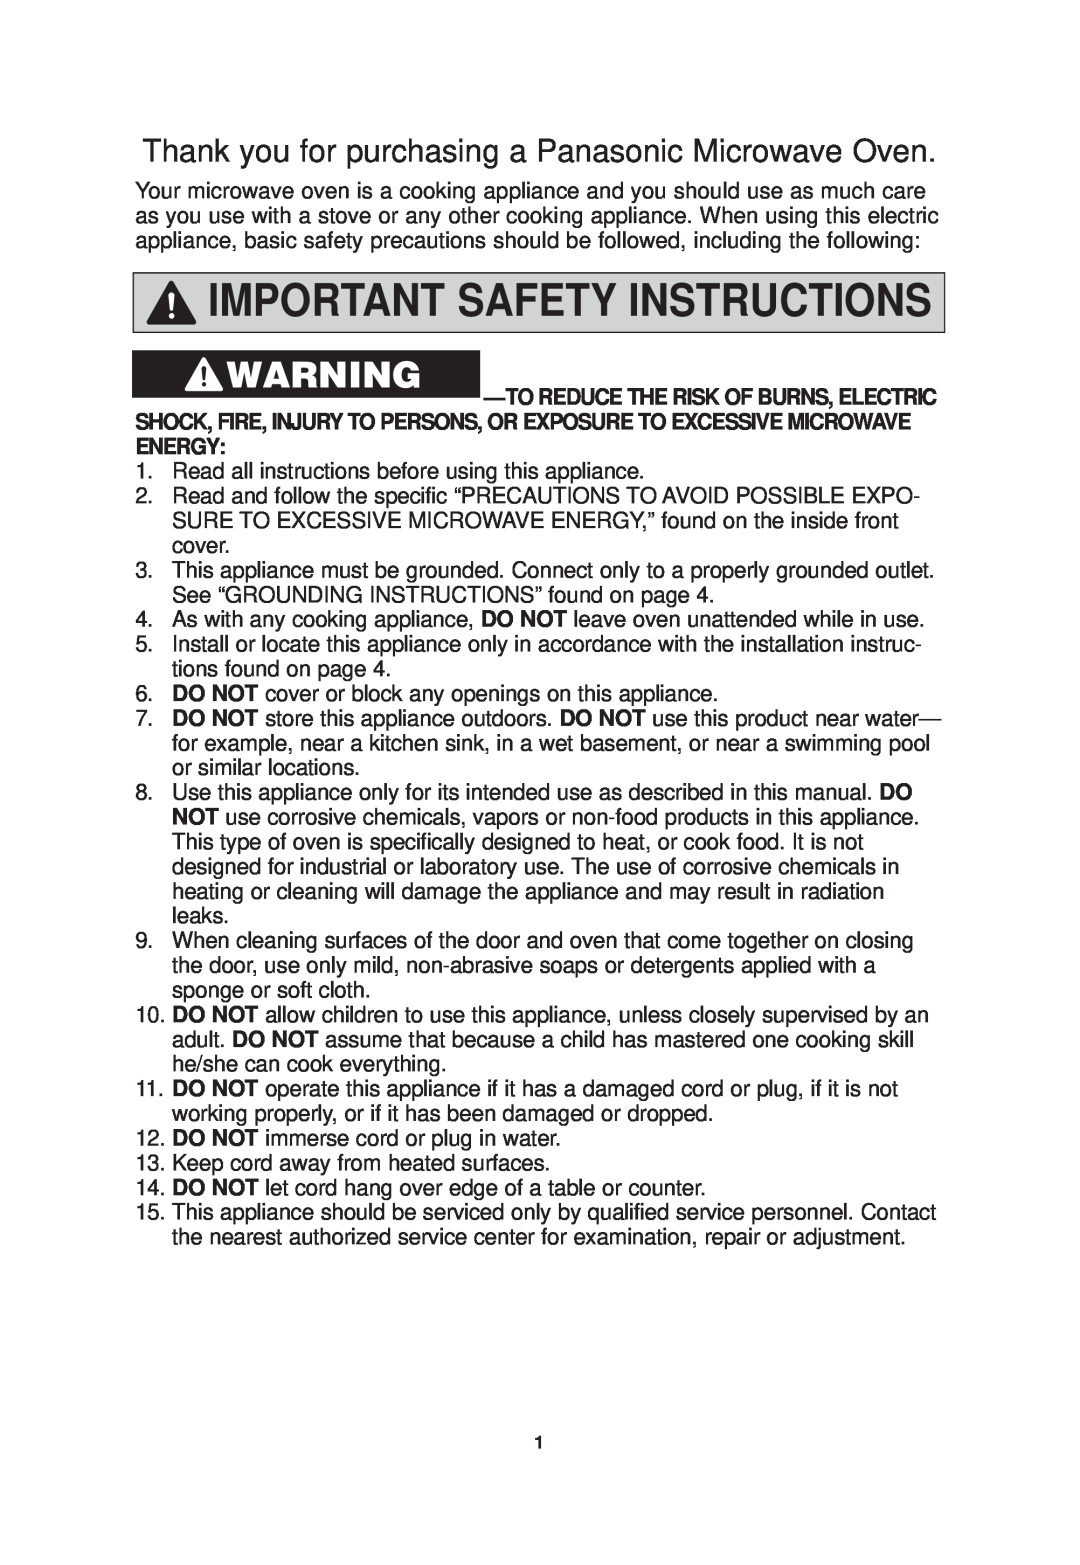 Panasonic NN-SF550M Important Safety Instructions, Thank you for purchasing a Panasonic Microwave Oven 